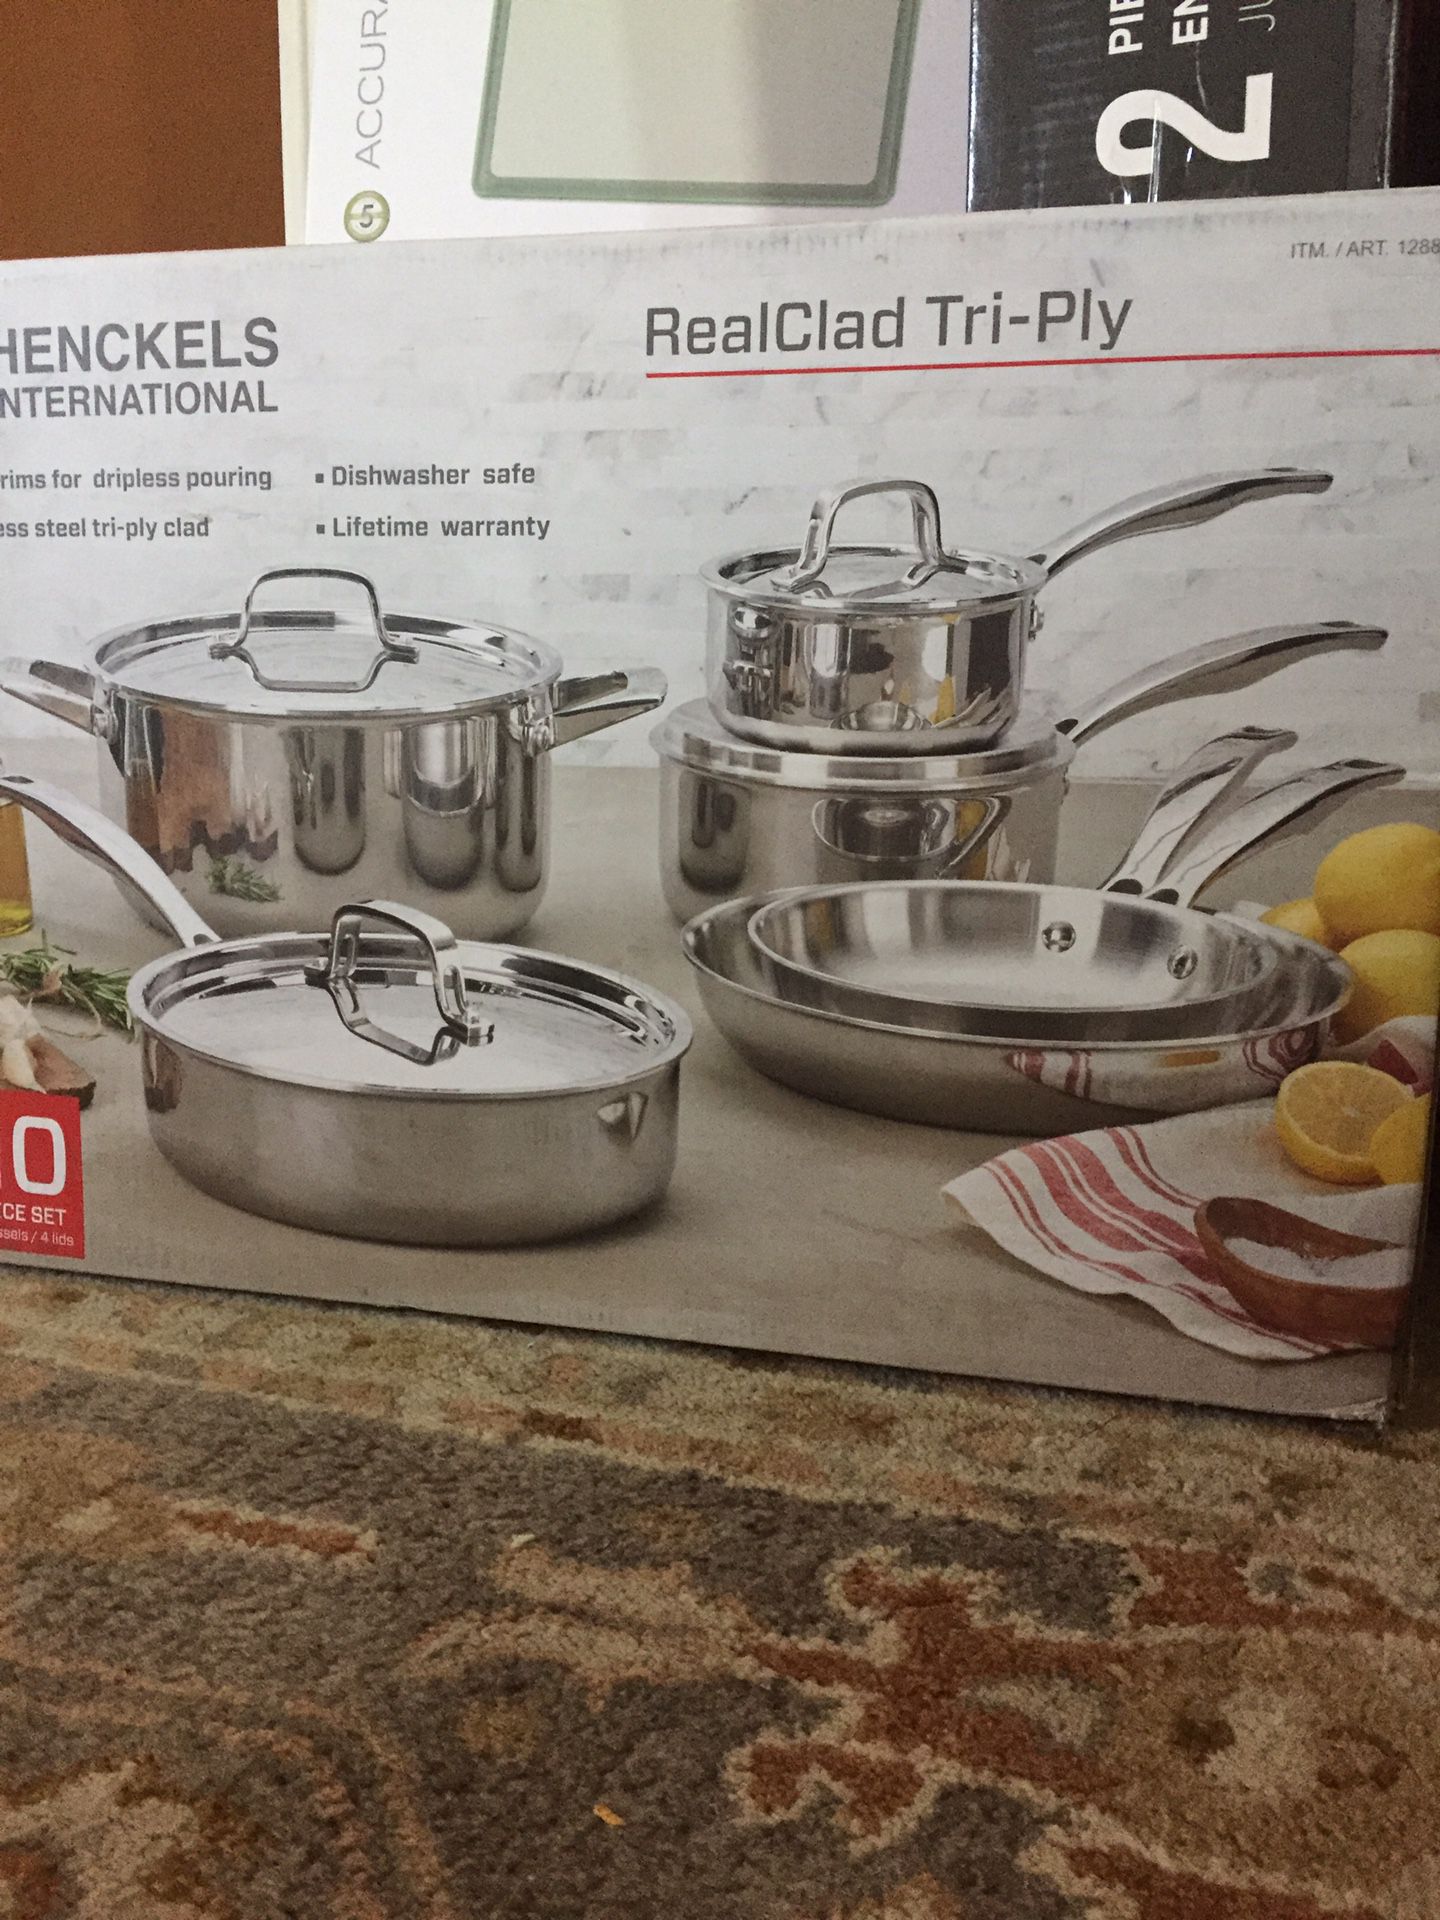 HENCKELS INTERNATIONAL 10 PIECE REAL CLAD TRI PLY STAINLESS STEAL